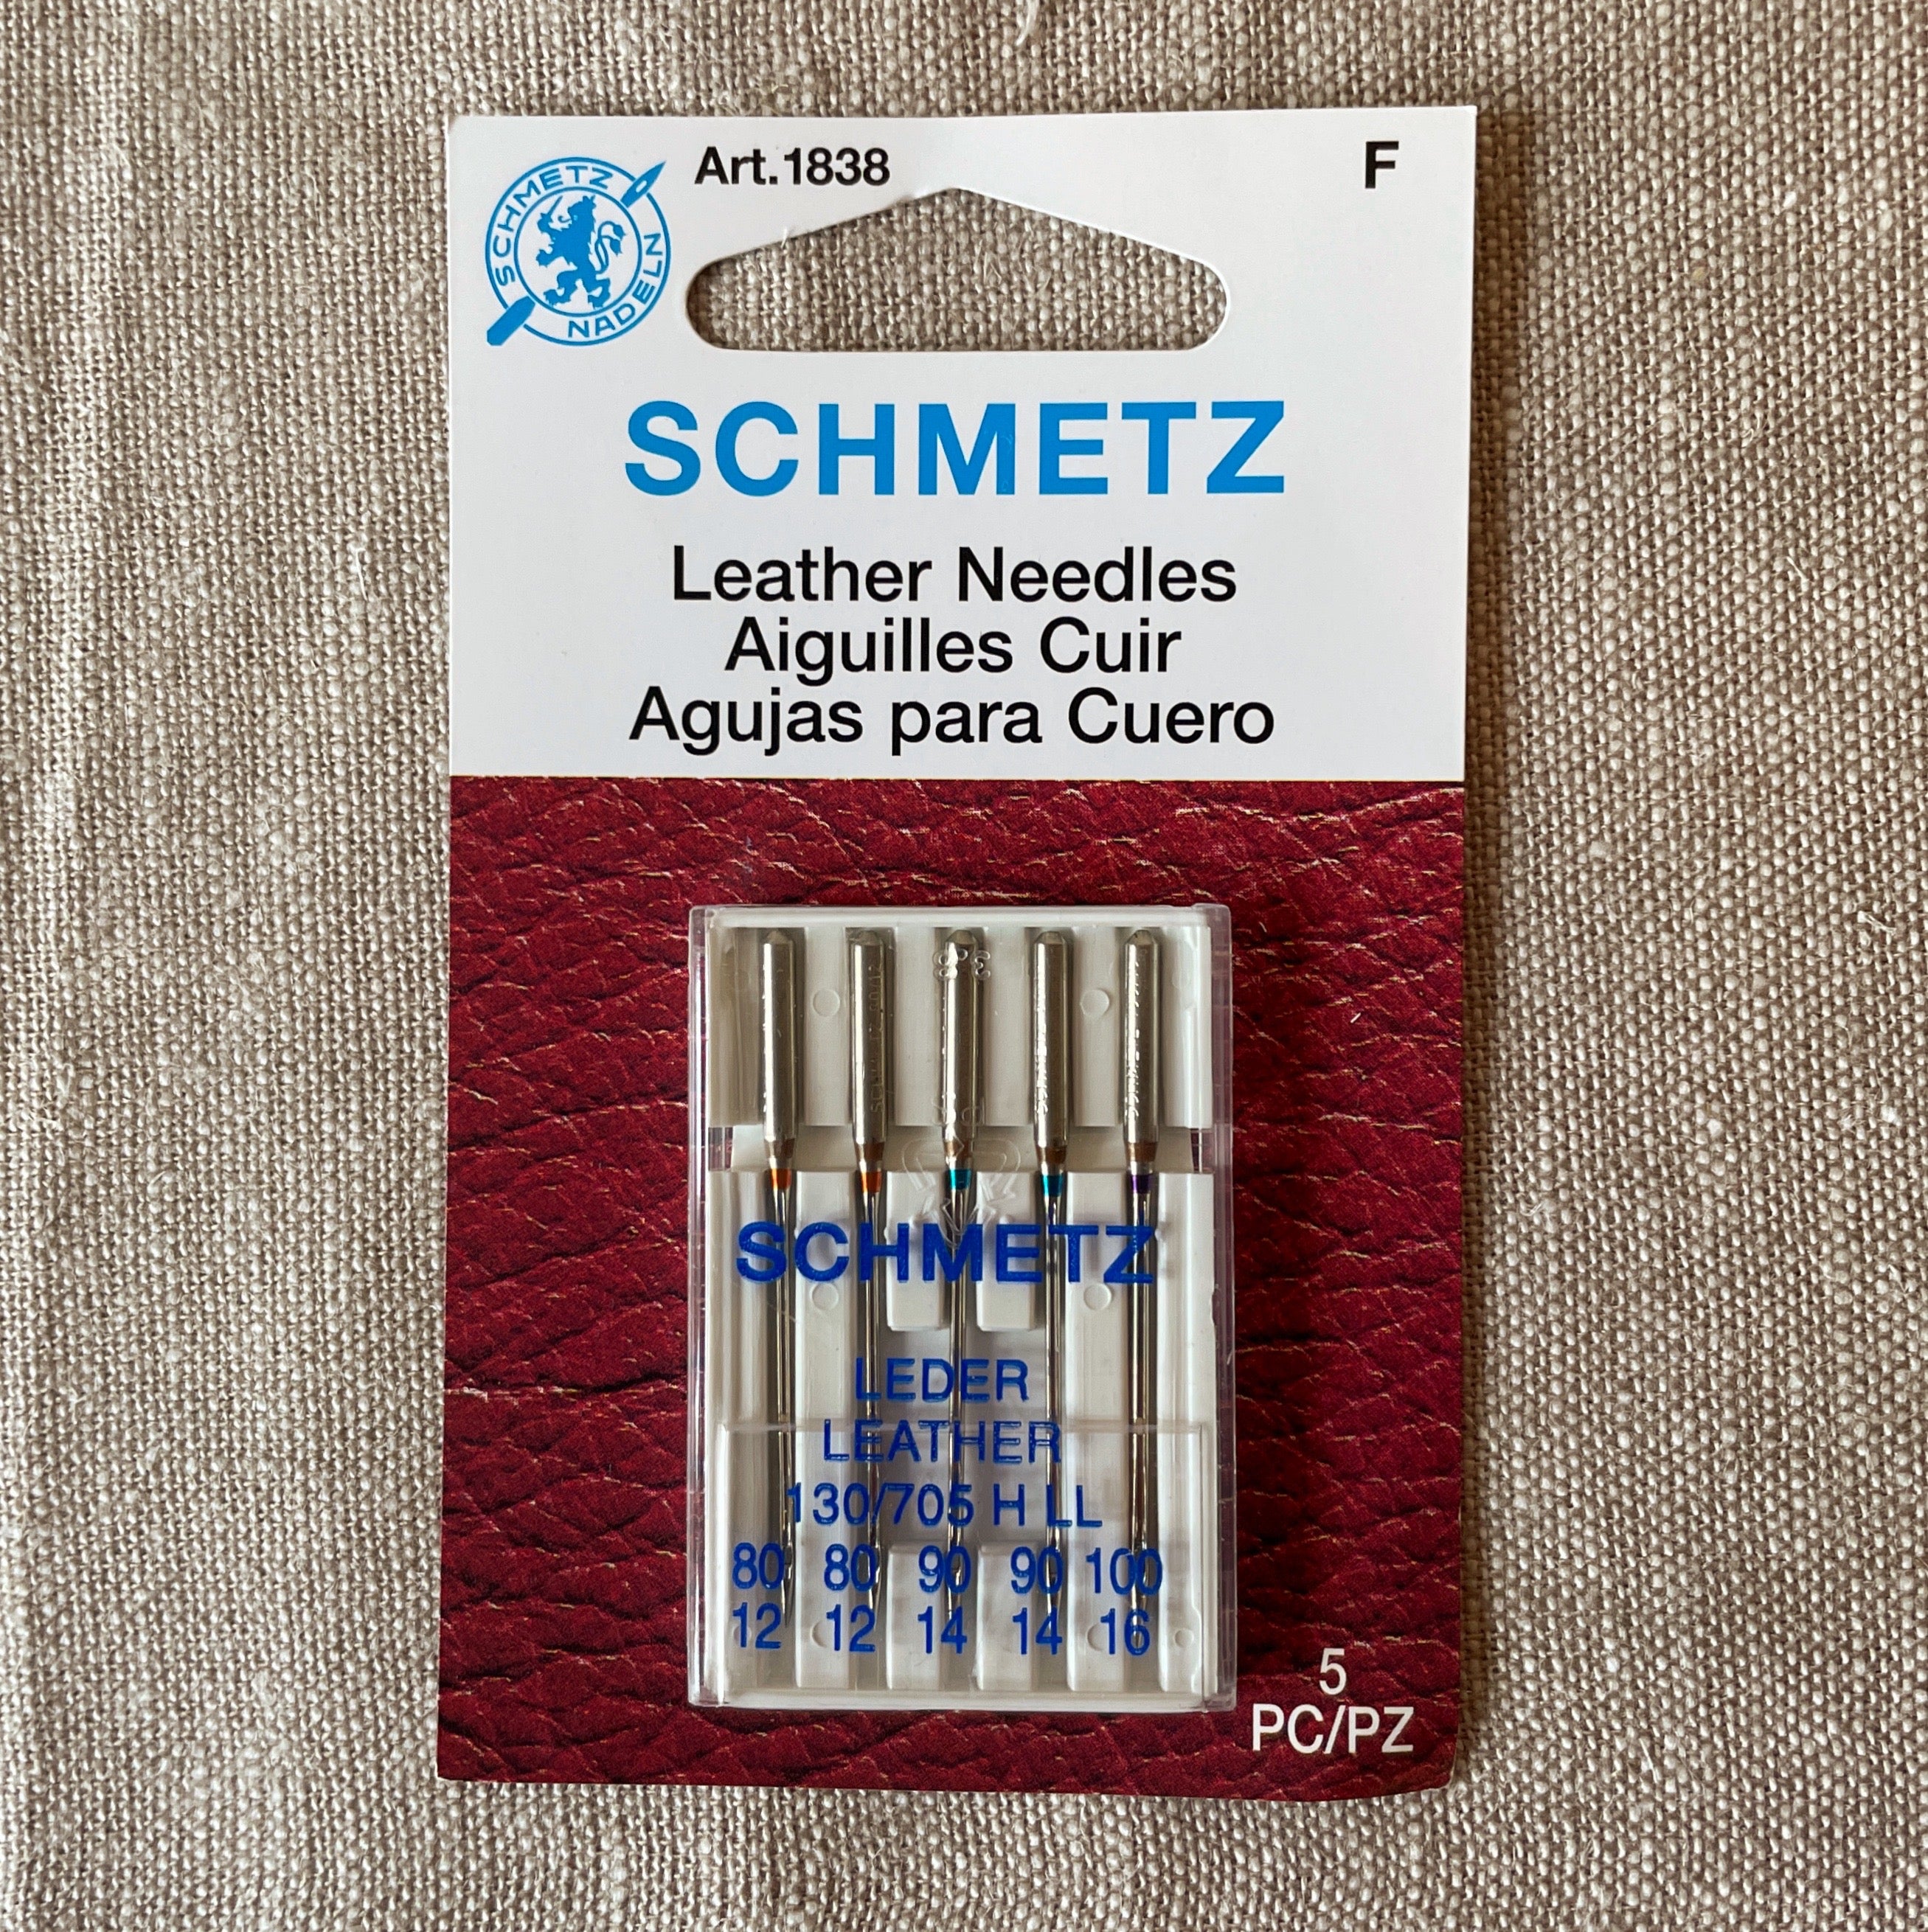 Universal Sewing Machine Needles – Assorted Size (2 pack) from Schmetz